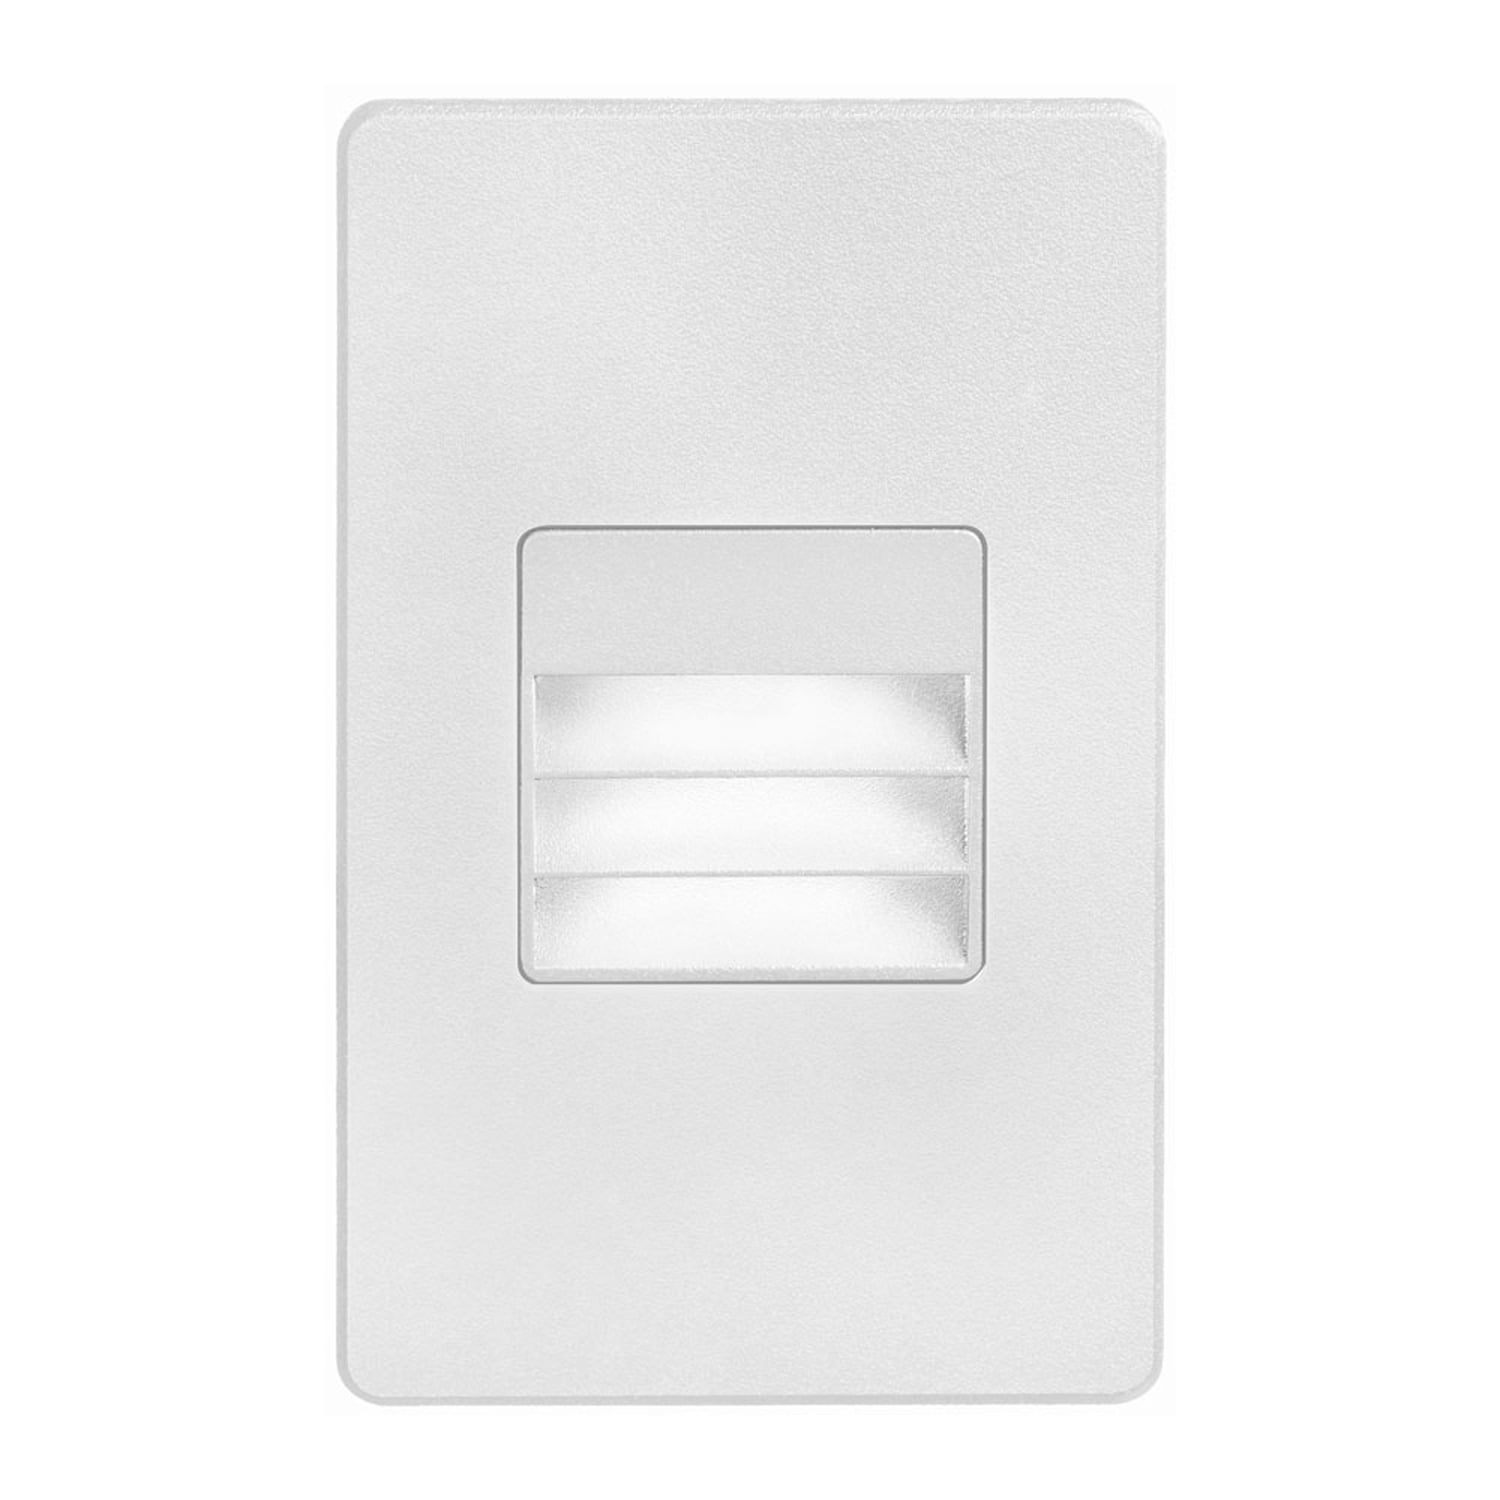 Dledw-234-wh 120v Ac Input, 2700k, 3.3w Ip65, White Wall Led Light With Louver